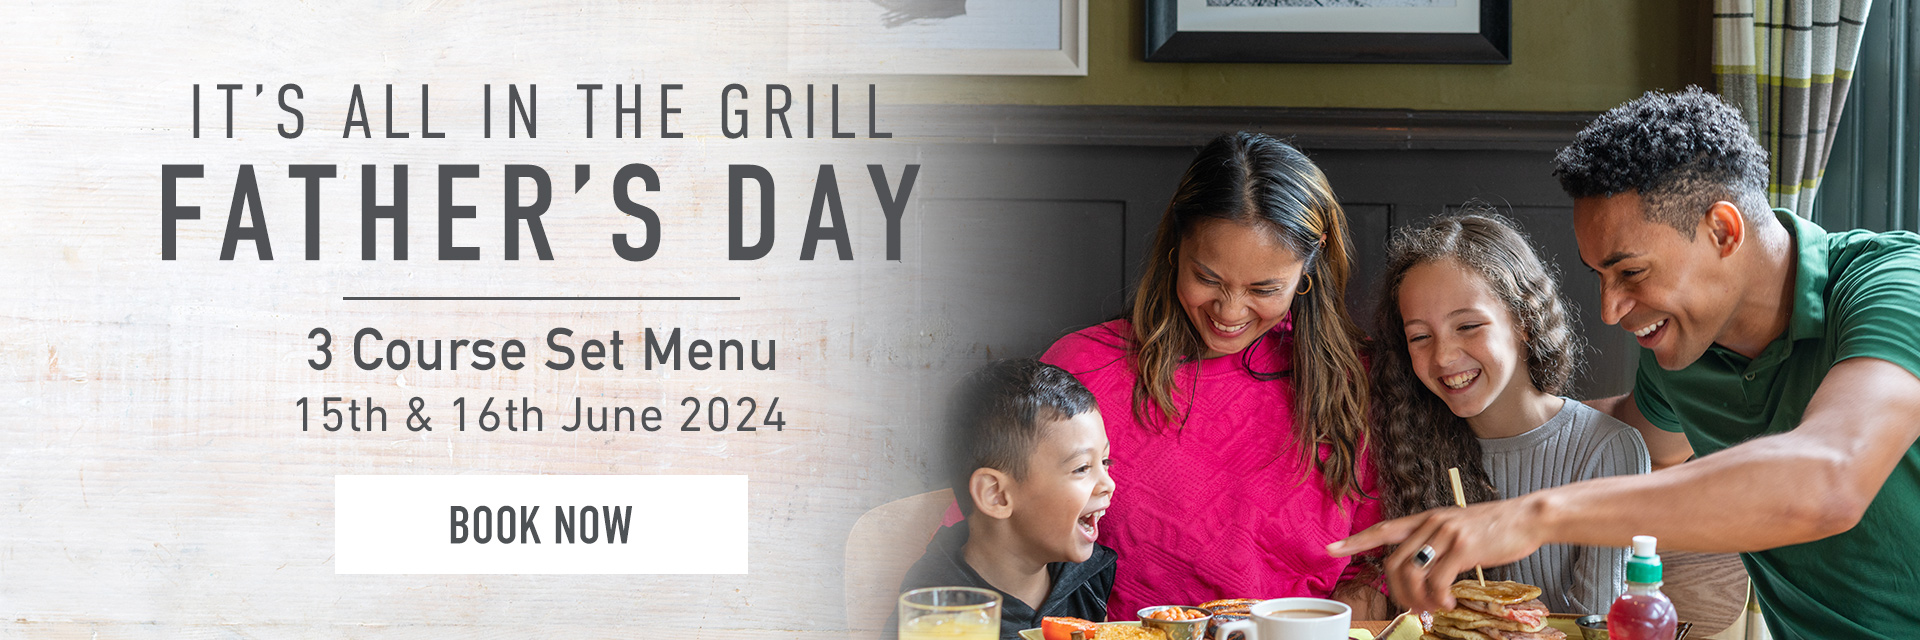 Father’s Day at Harvester Trentham Lakes